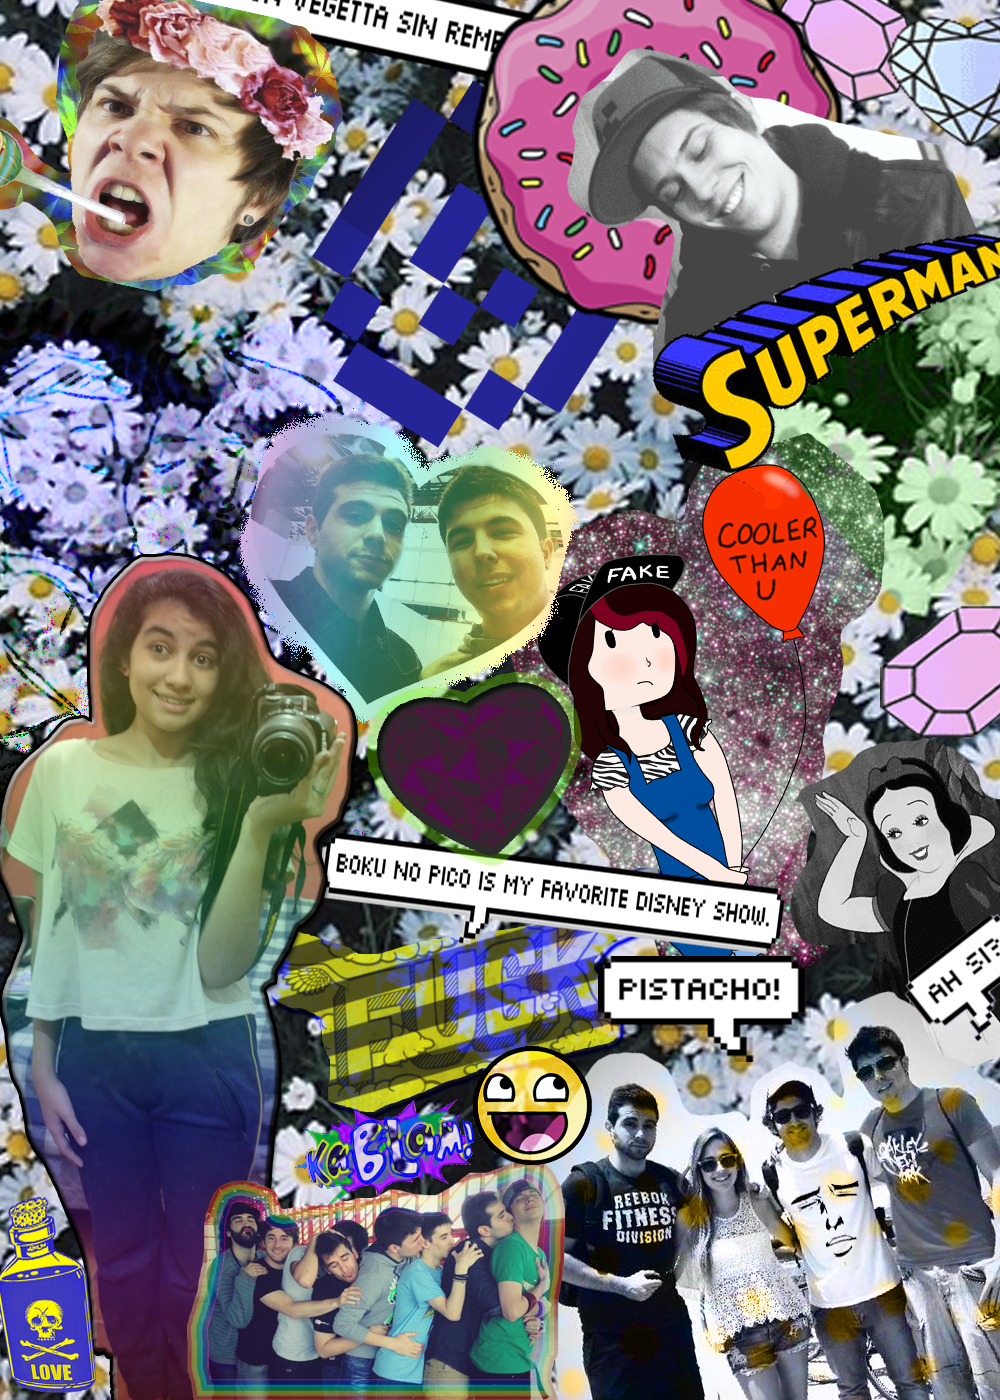 youtubers collage wallpaper